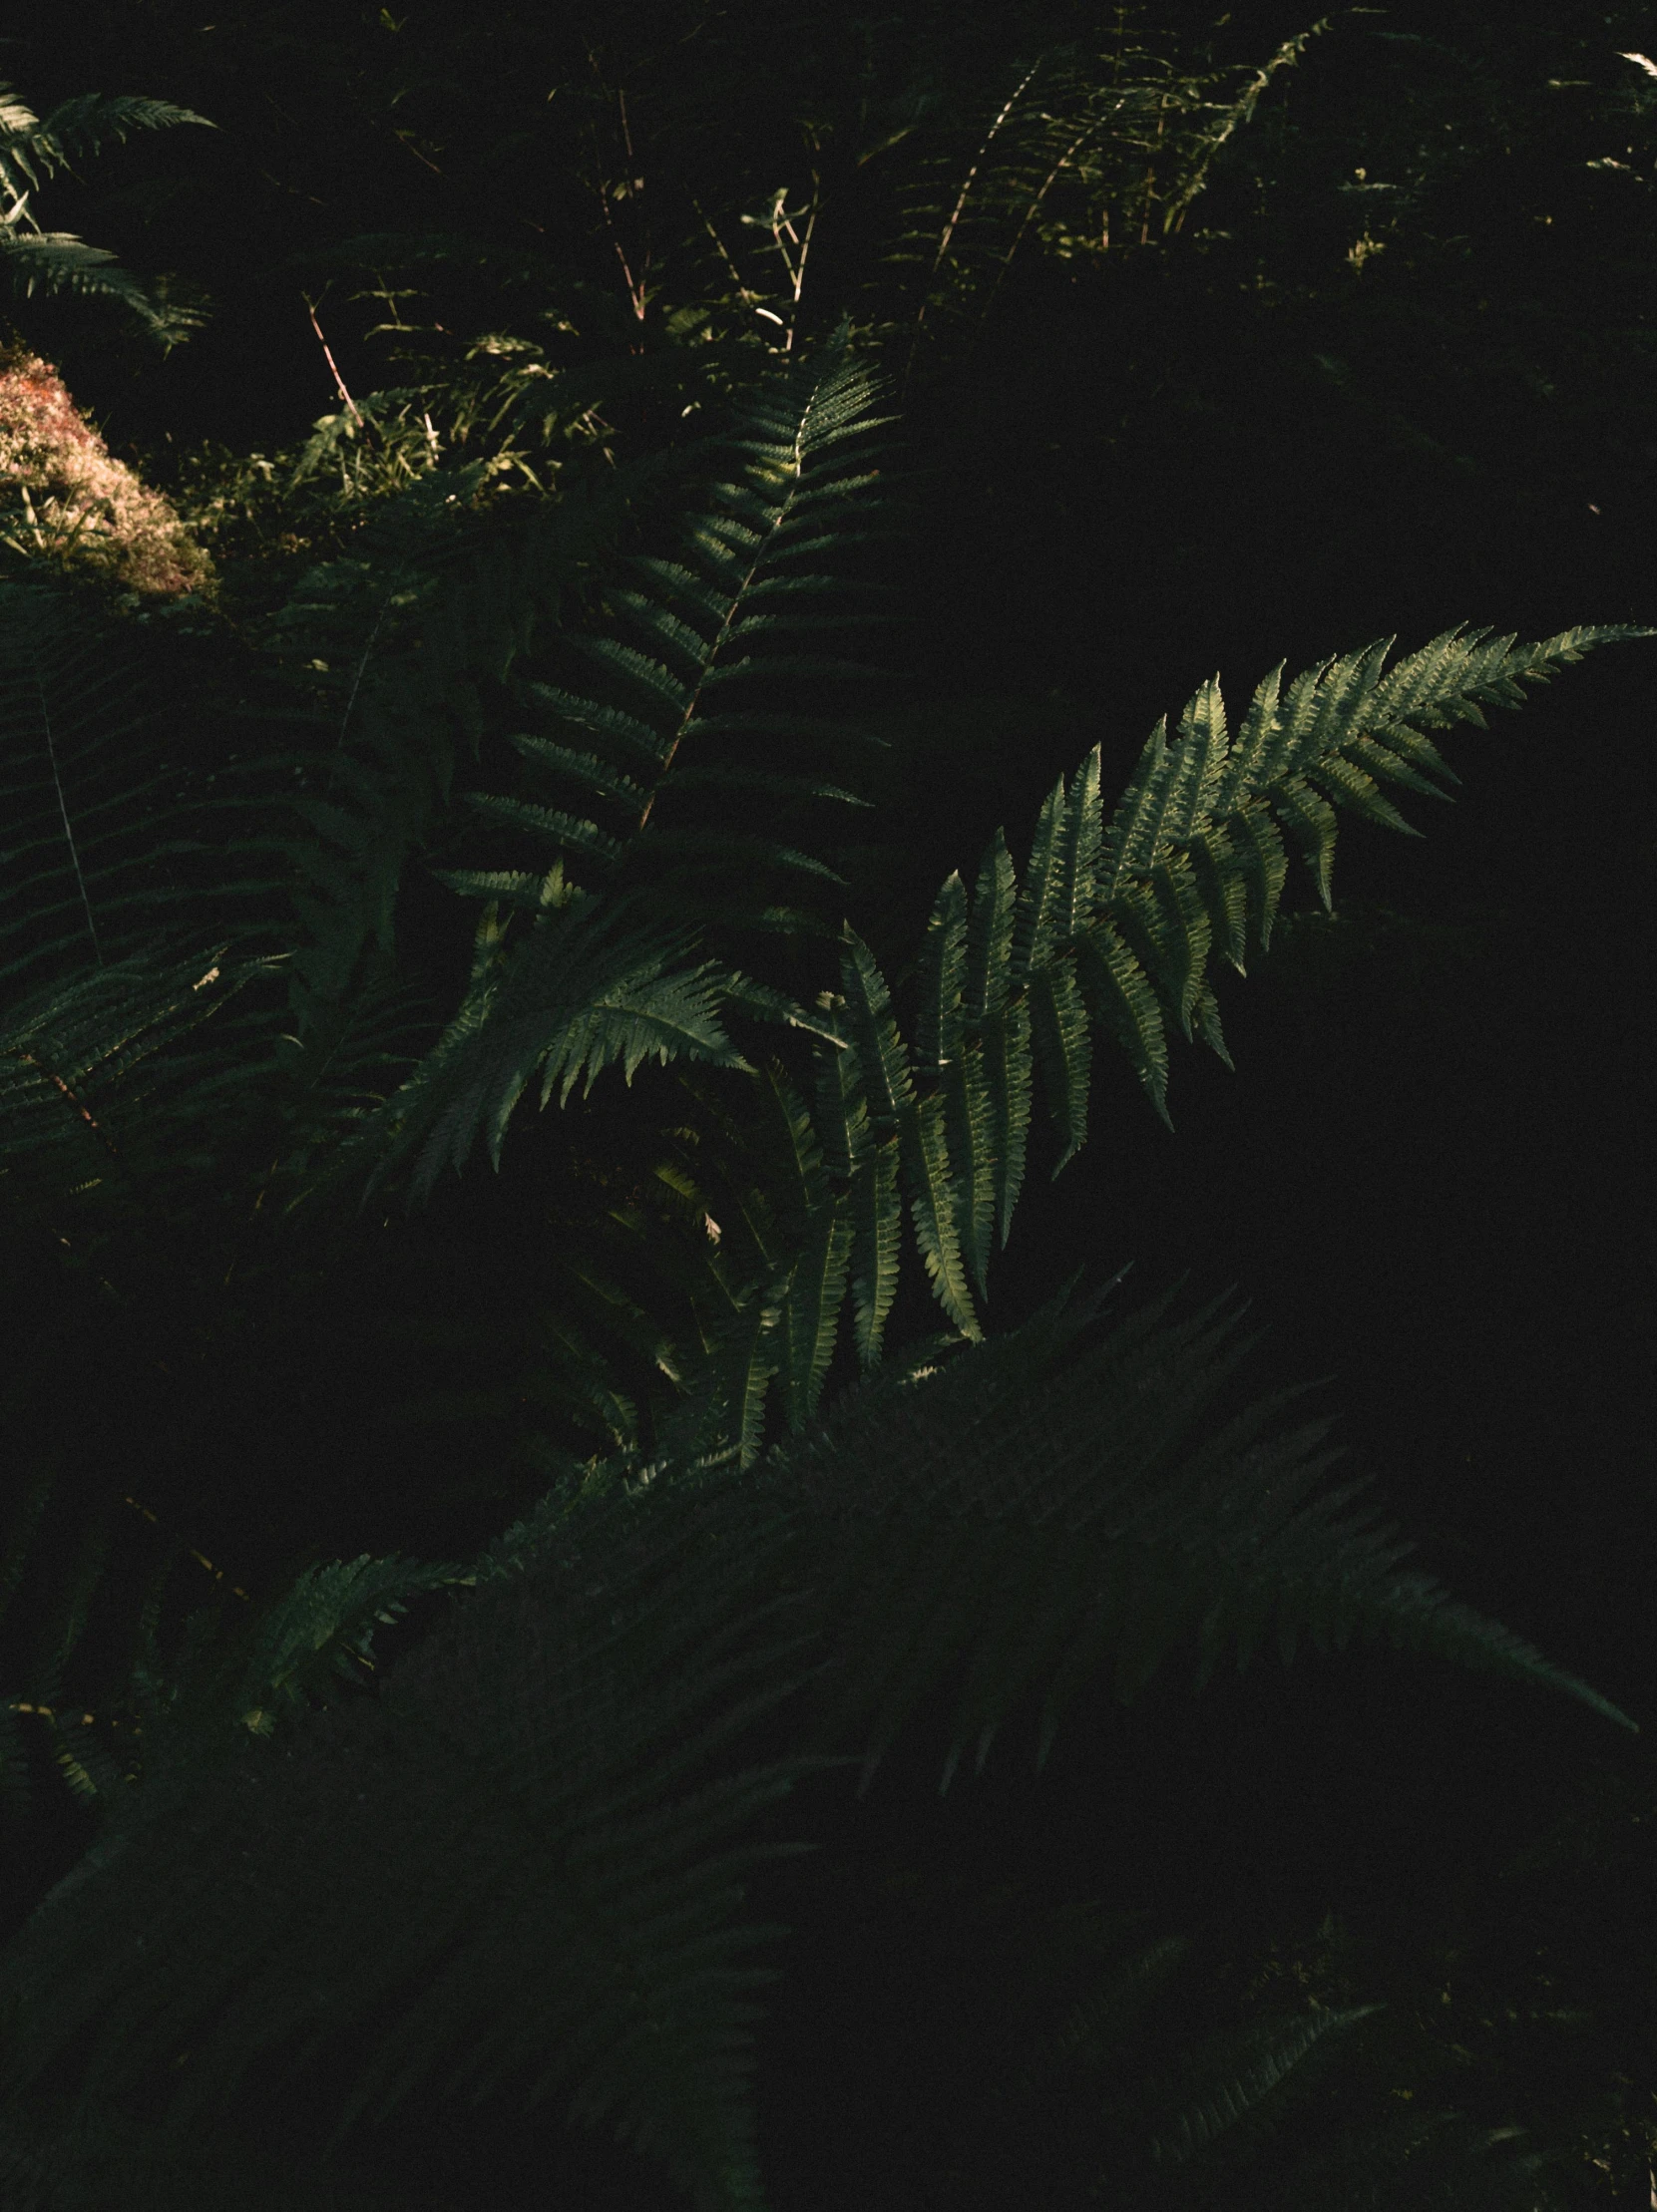 closeup of plants and ferns with an almost blurry background